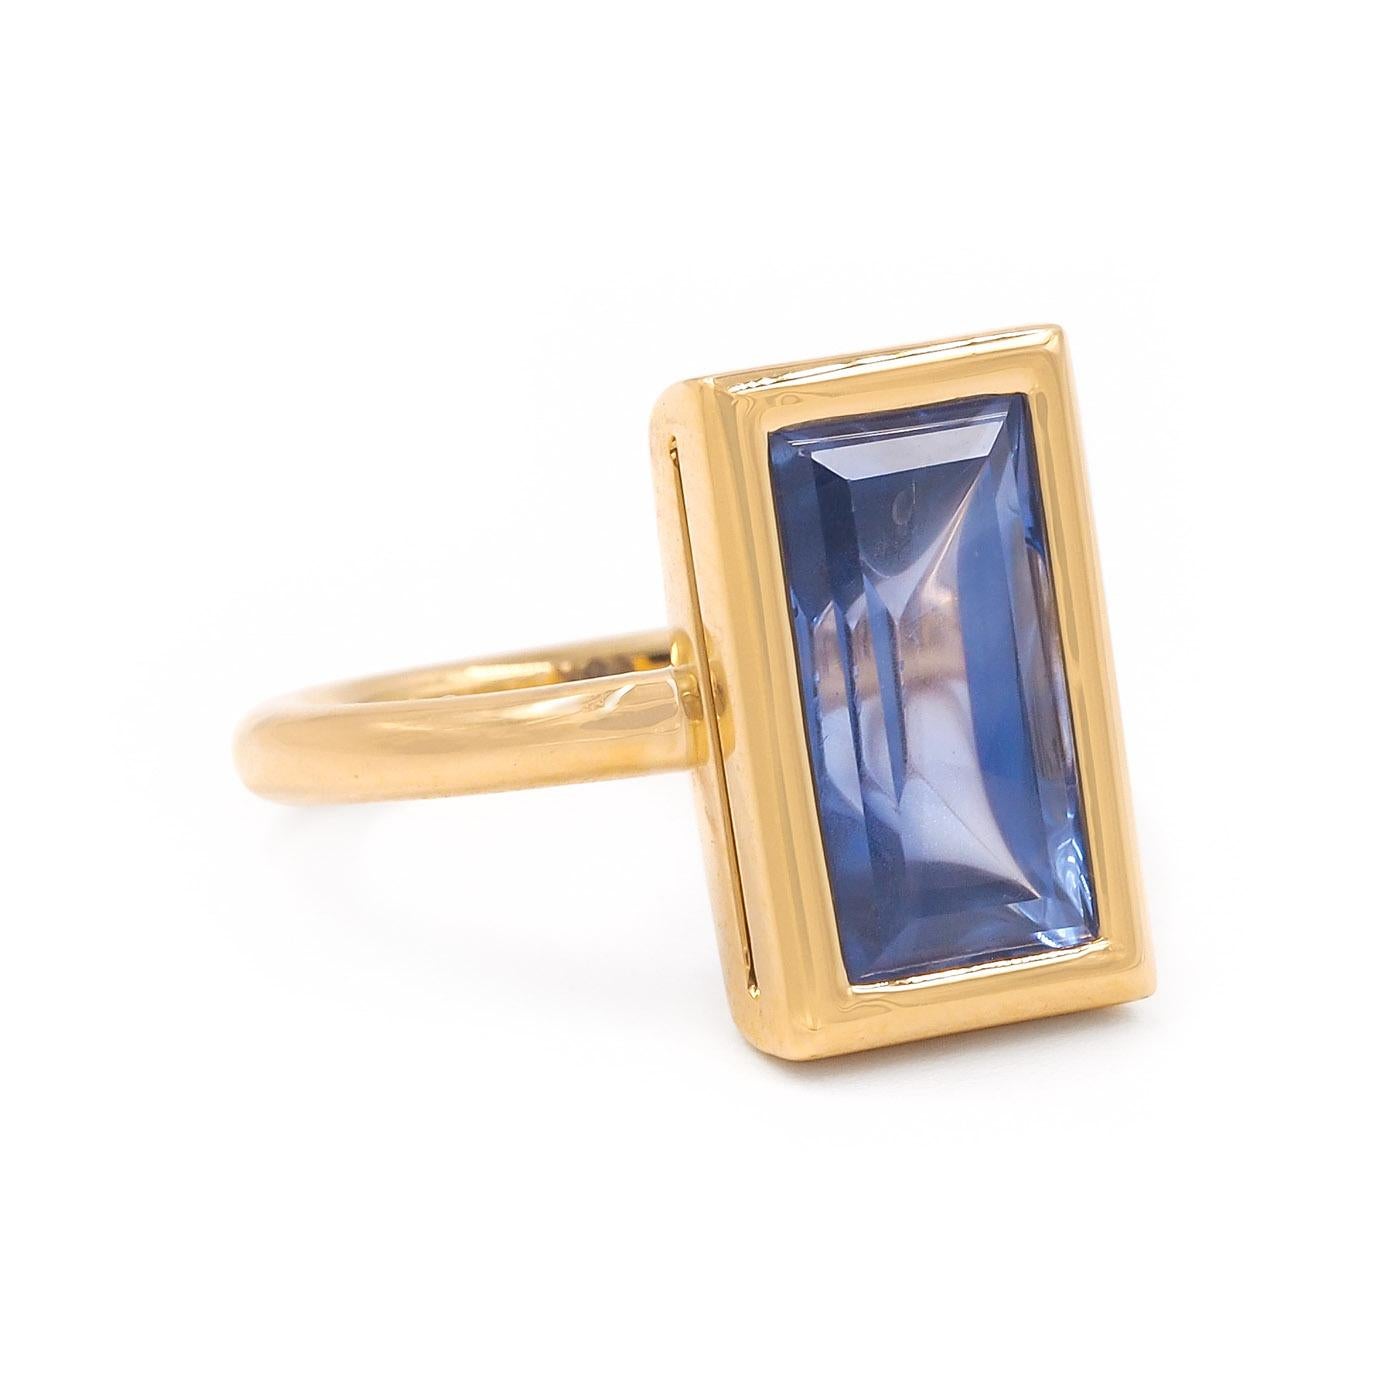 American made 6.50 Carat Ceylon Unheated Blue Sapphire Ring from Bespoke by Platt, composed of 18k yellow gold. The vintage 6.50 carat blue sapphire is AGL certified to have Ceylon (Sri Lanka) Origin, with No Heat Treatment. The rectangular setting